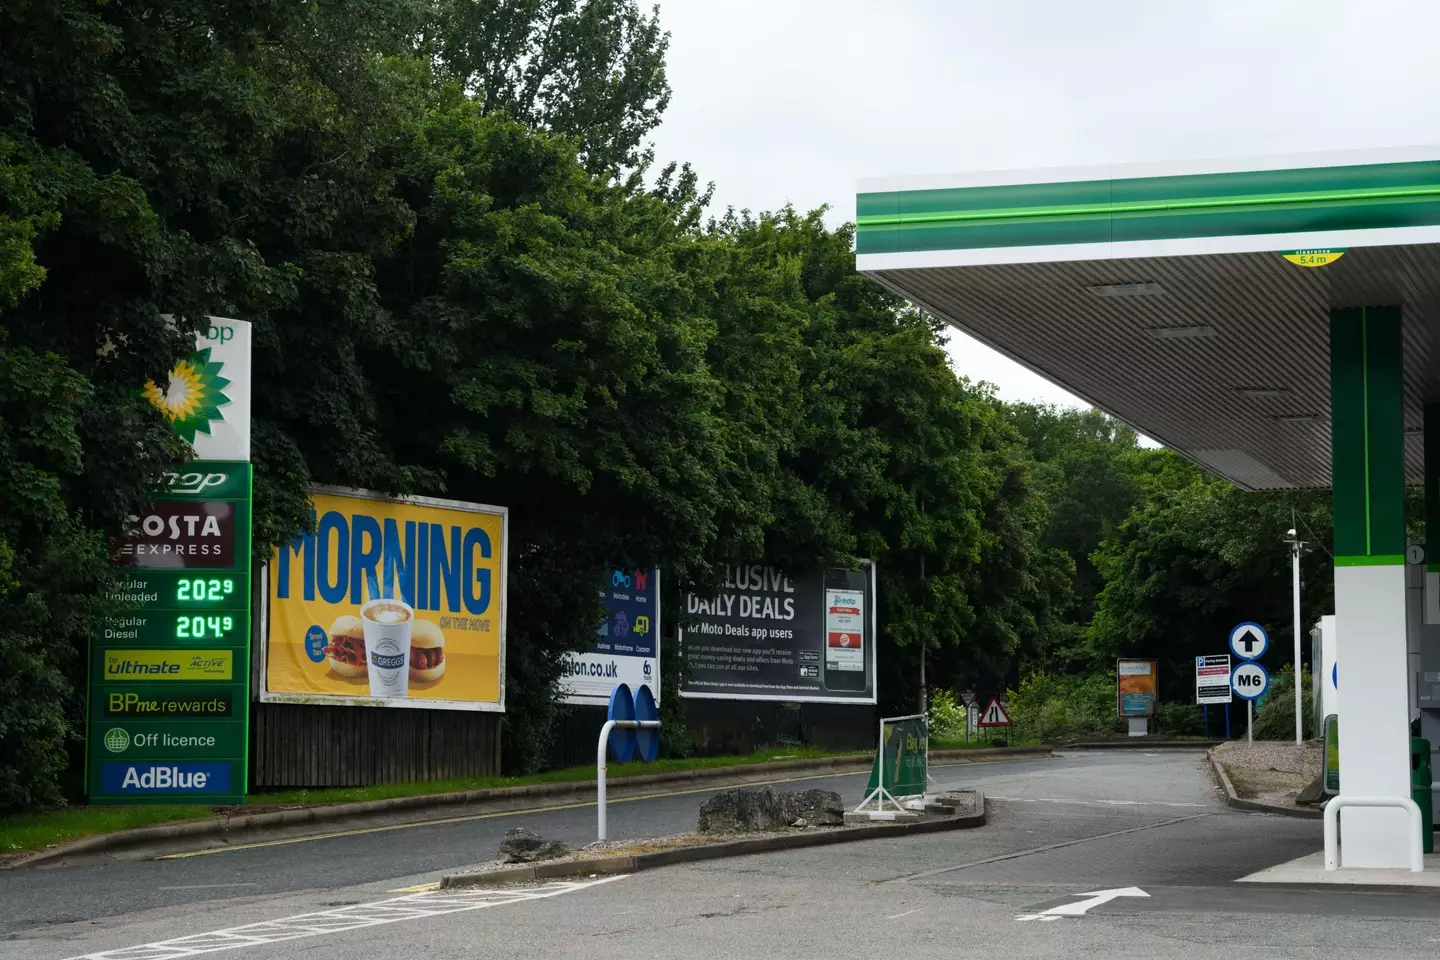 The price of petrol has climbed as high as £2 per litre in some parts of the UK.